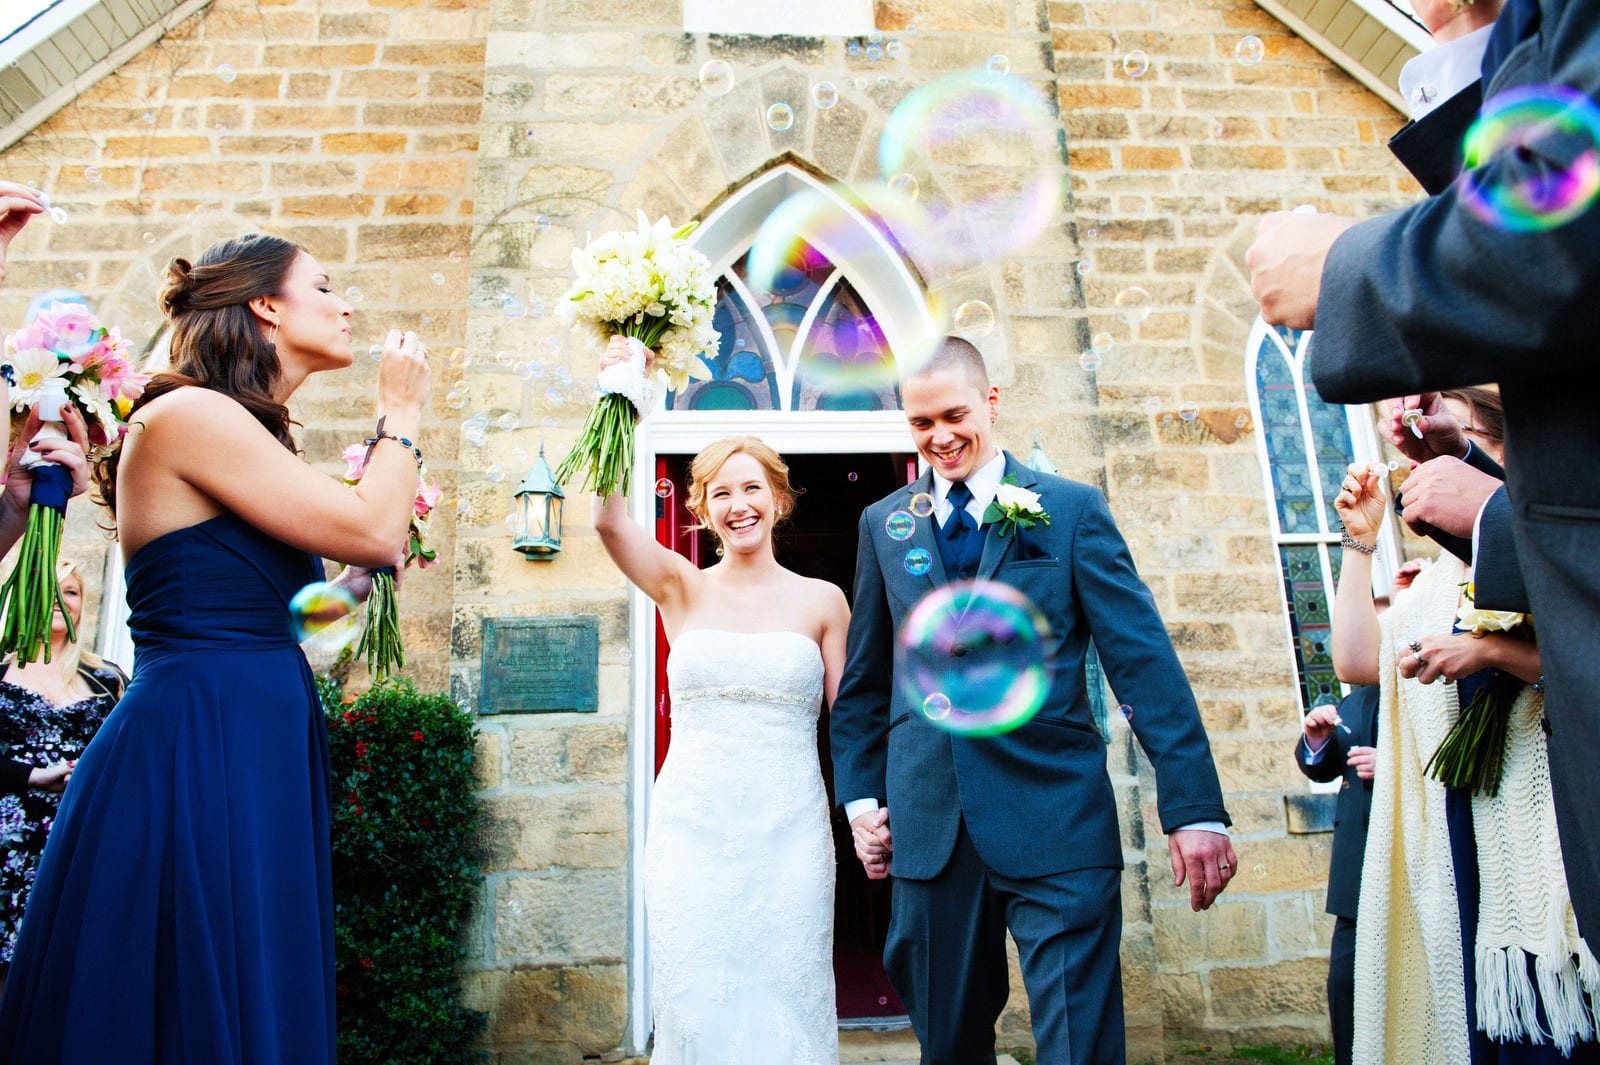 Seen through a cloud of bubbles, a bride and groom exit a stone church after their wedding.